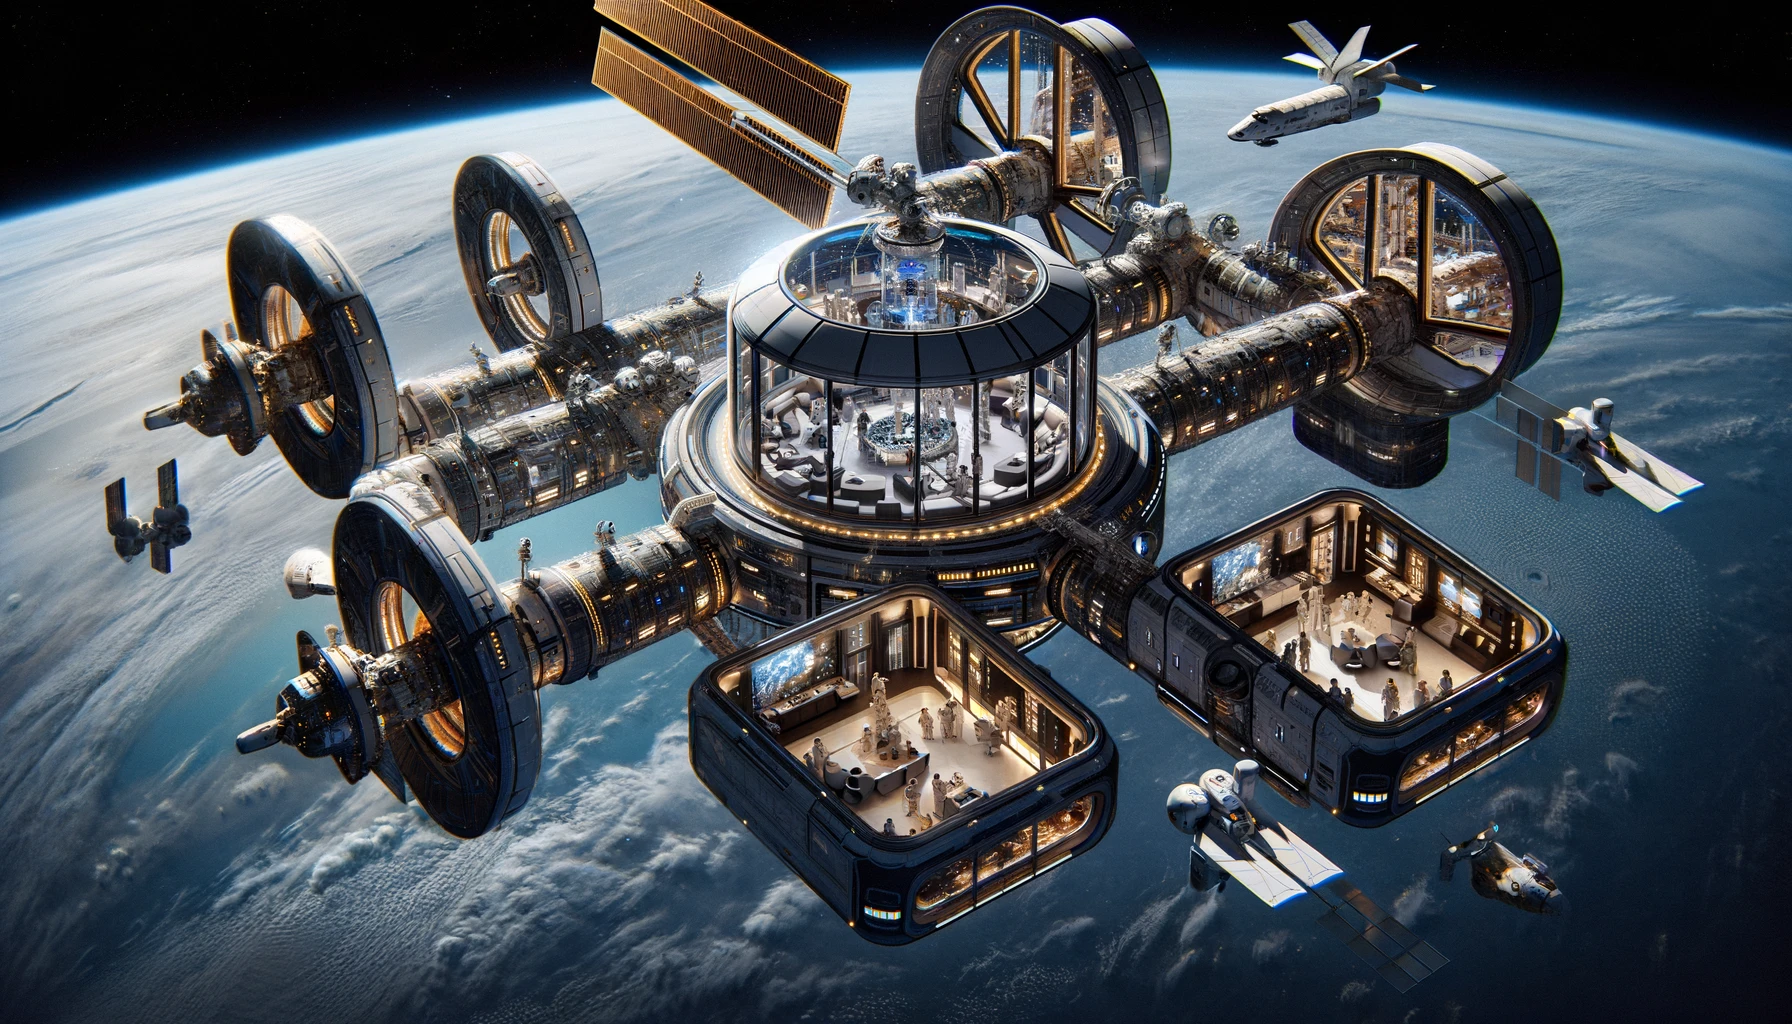 space-tourism-iss-international-space-station-hotel-wing-csdn